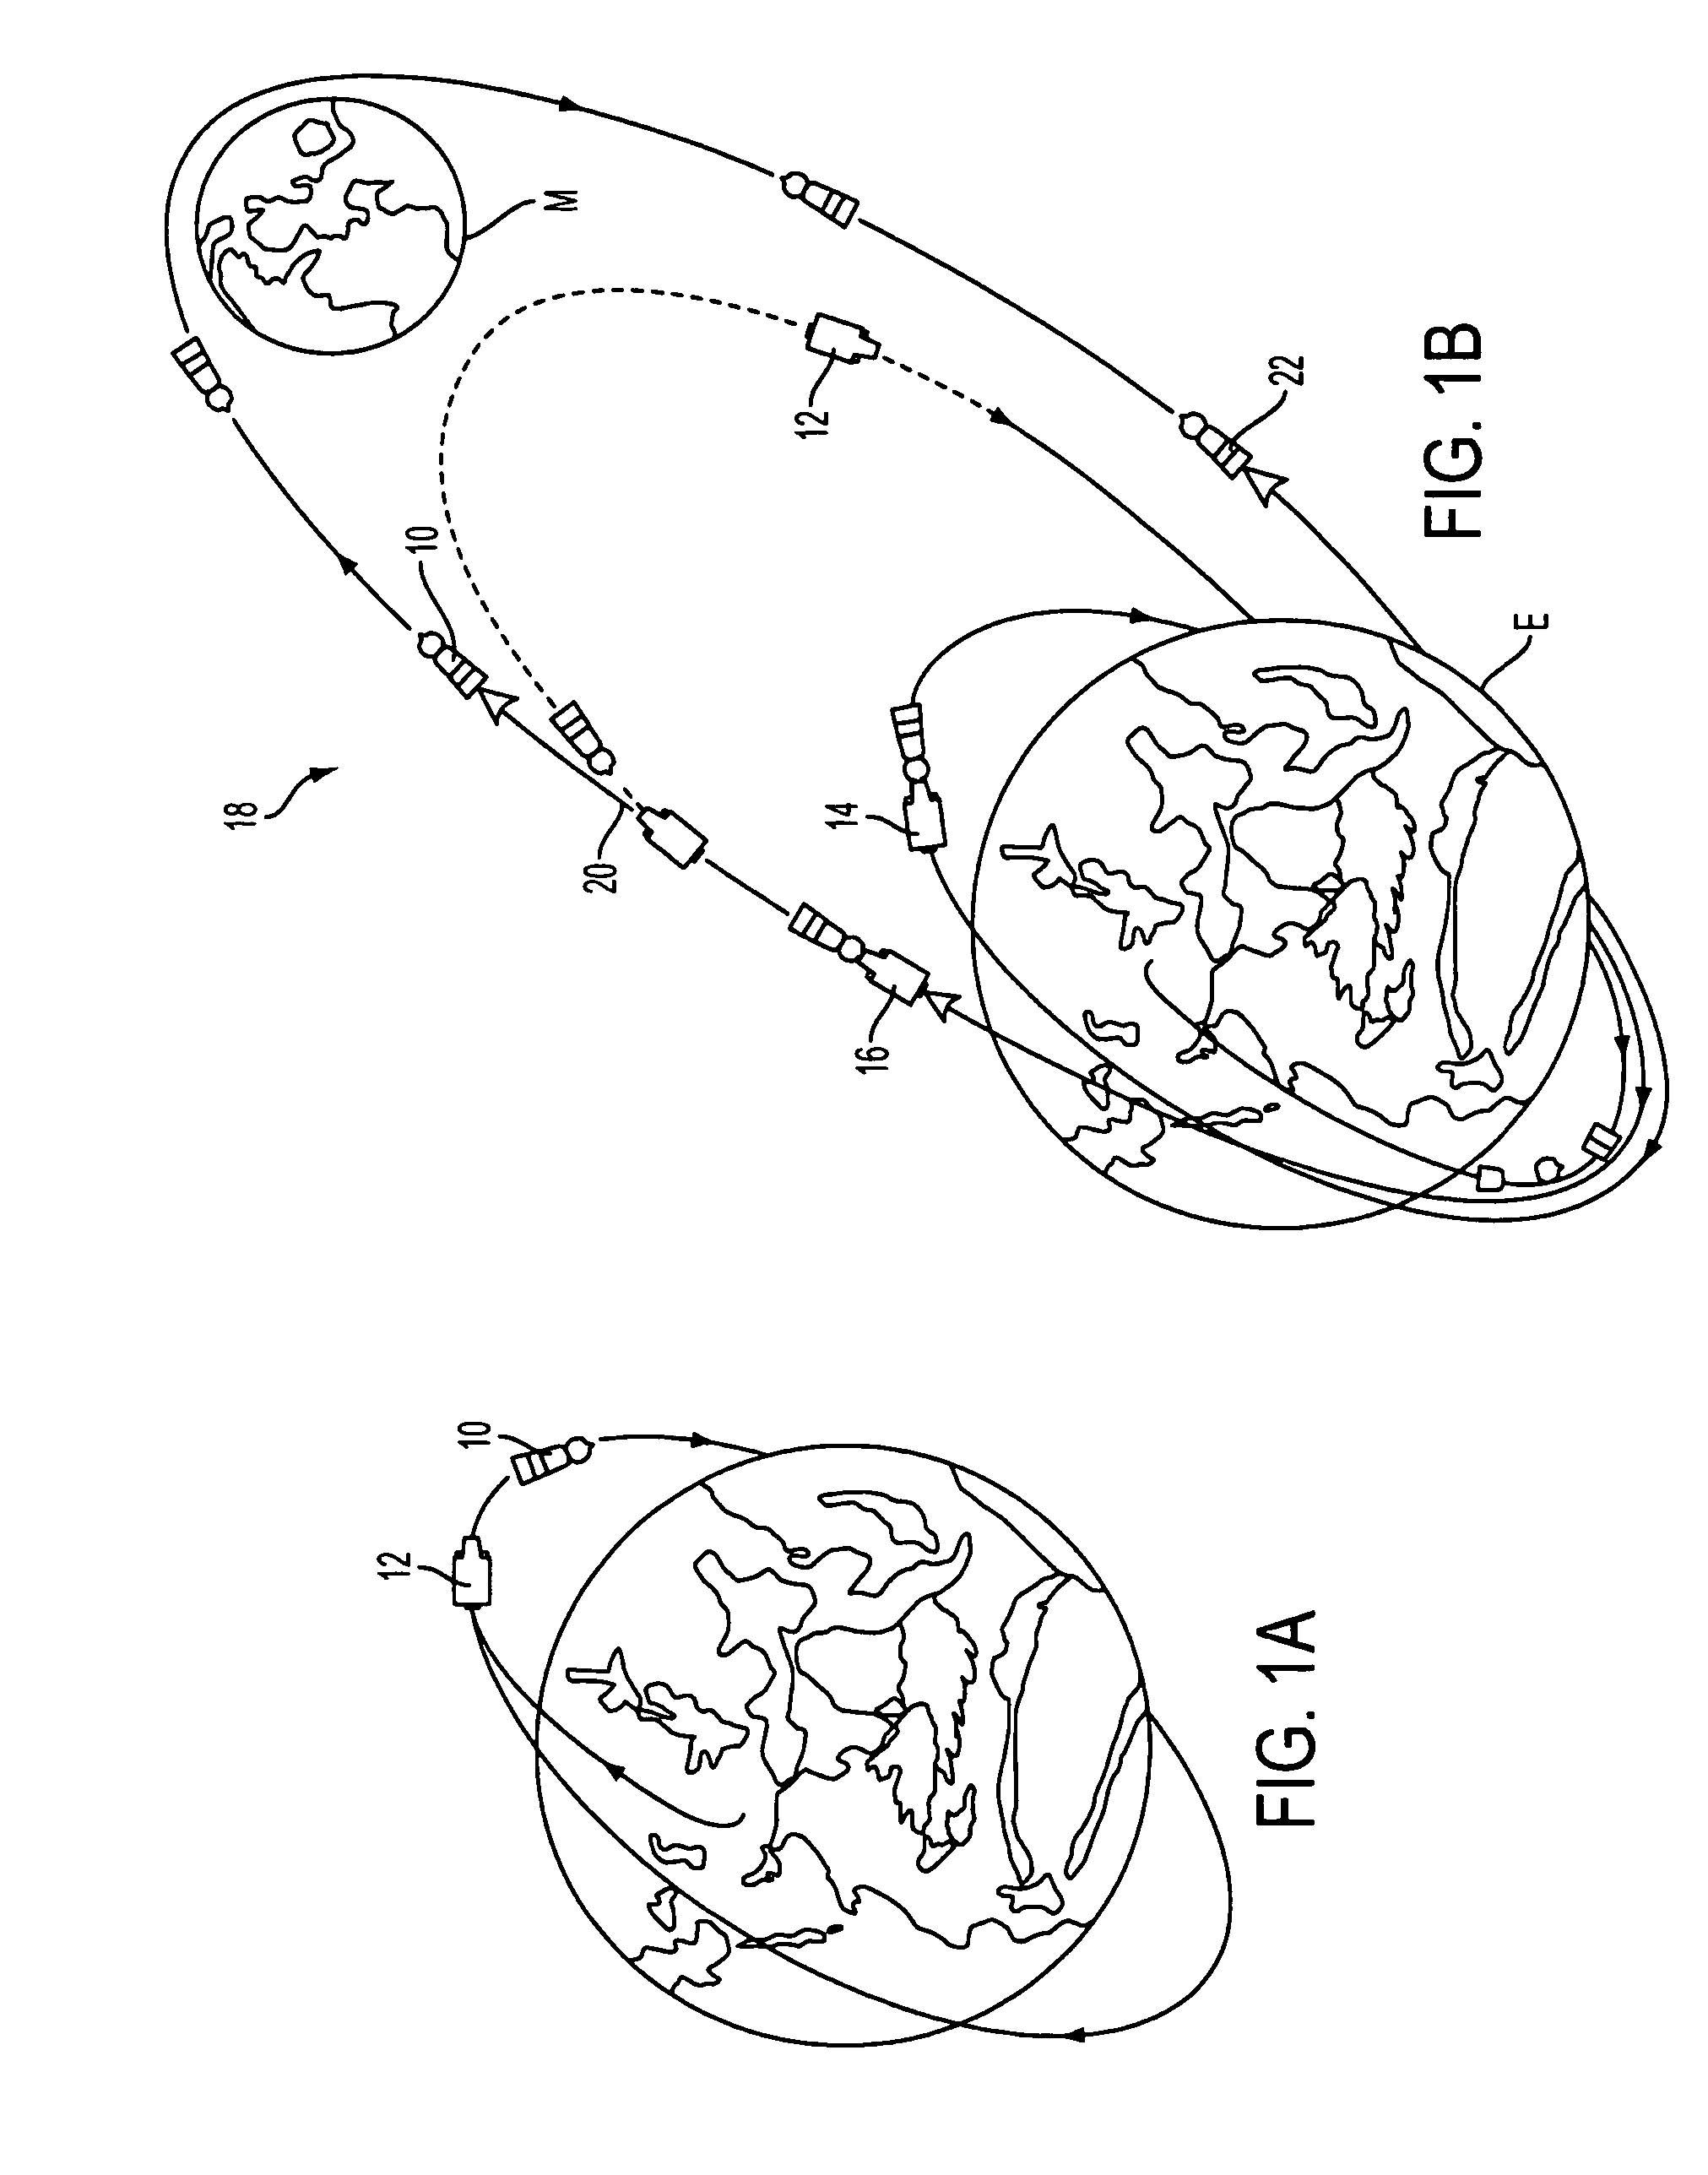 Method, apparatus, and system for private lunar exploration